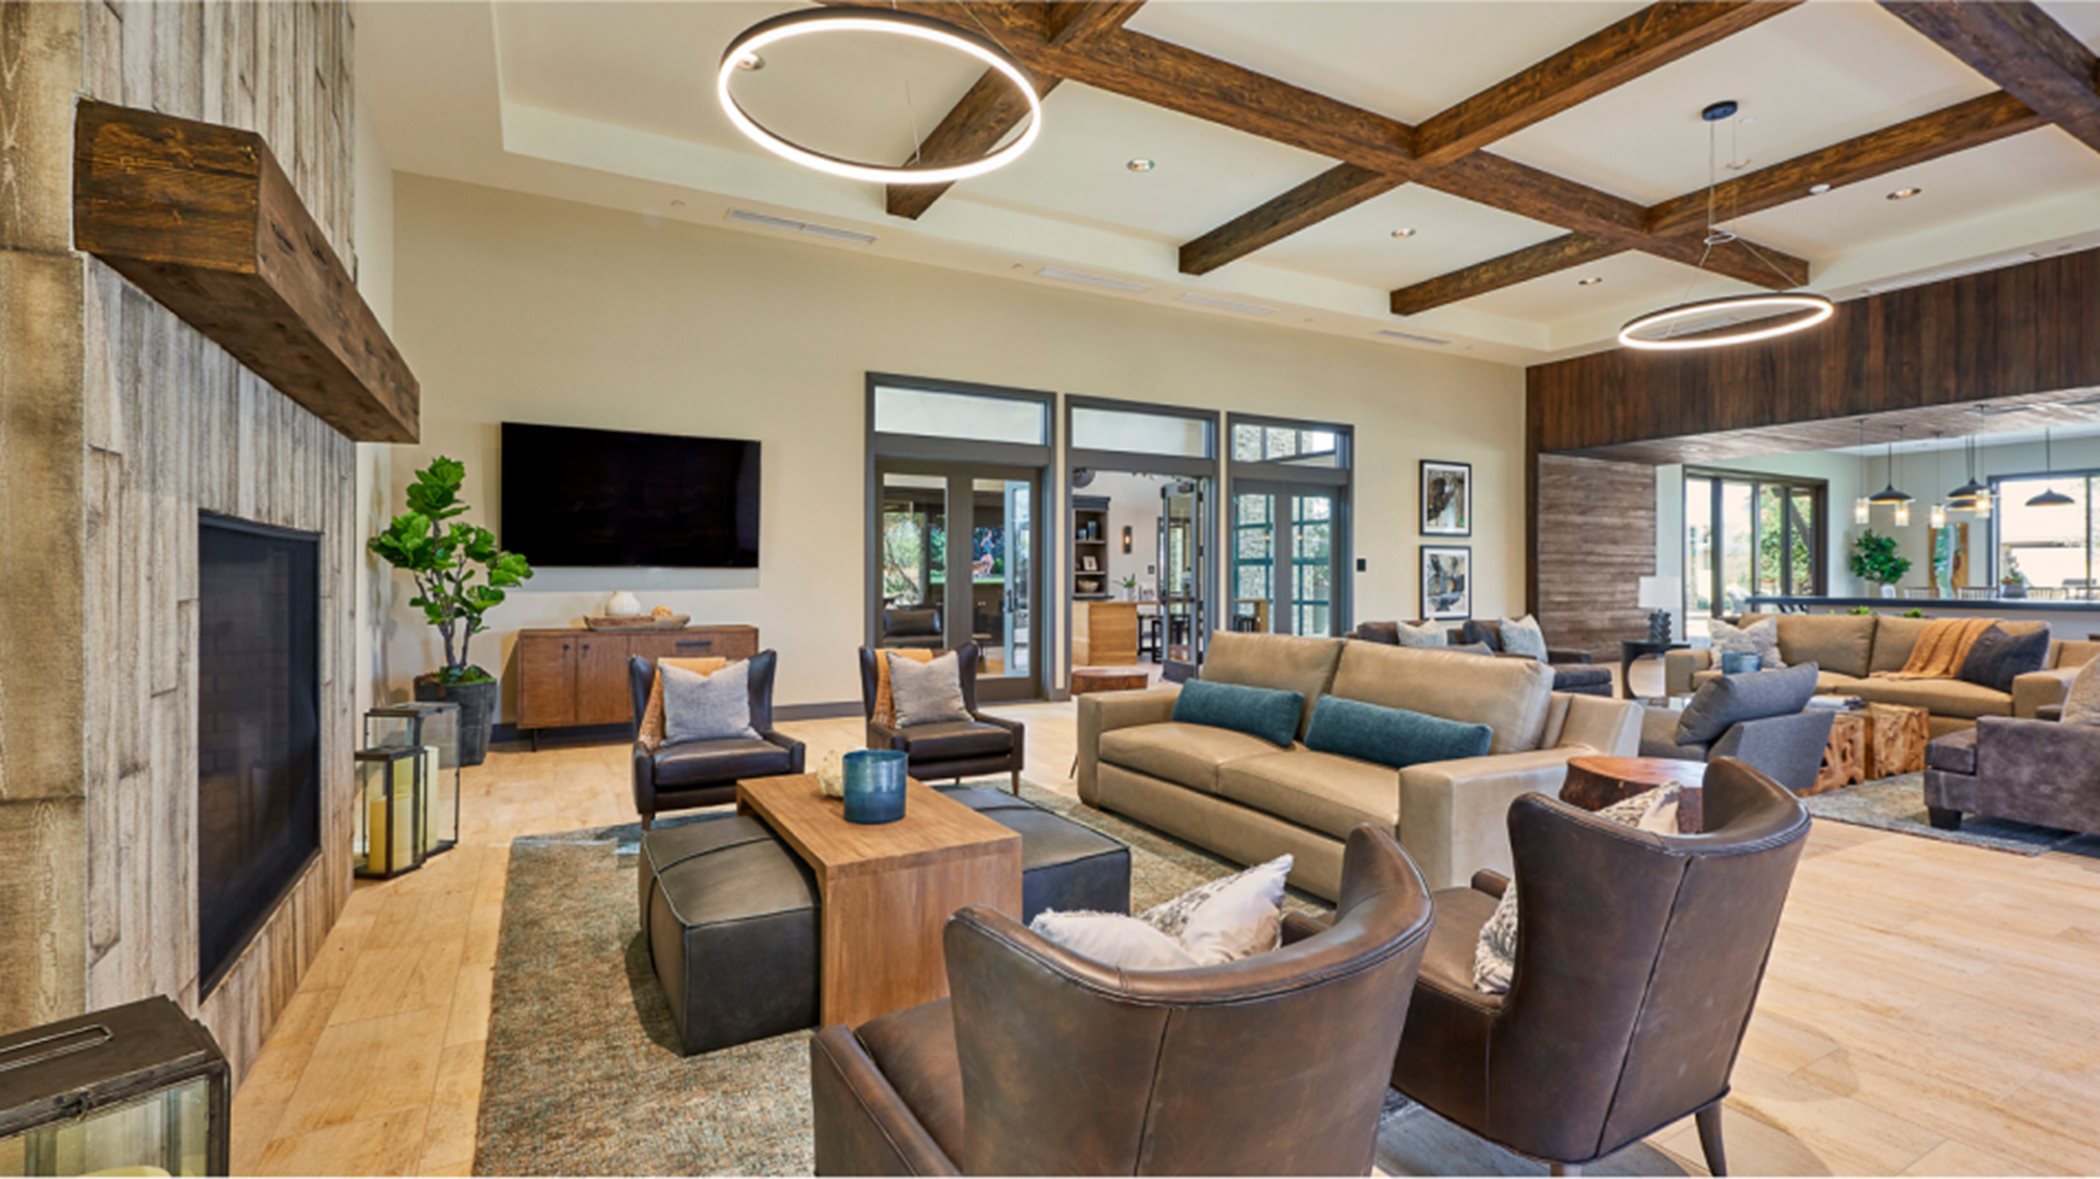 Clubhouse amenity waiting area interior